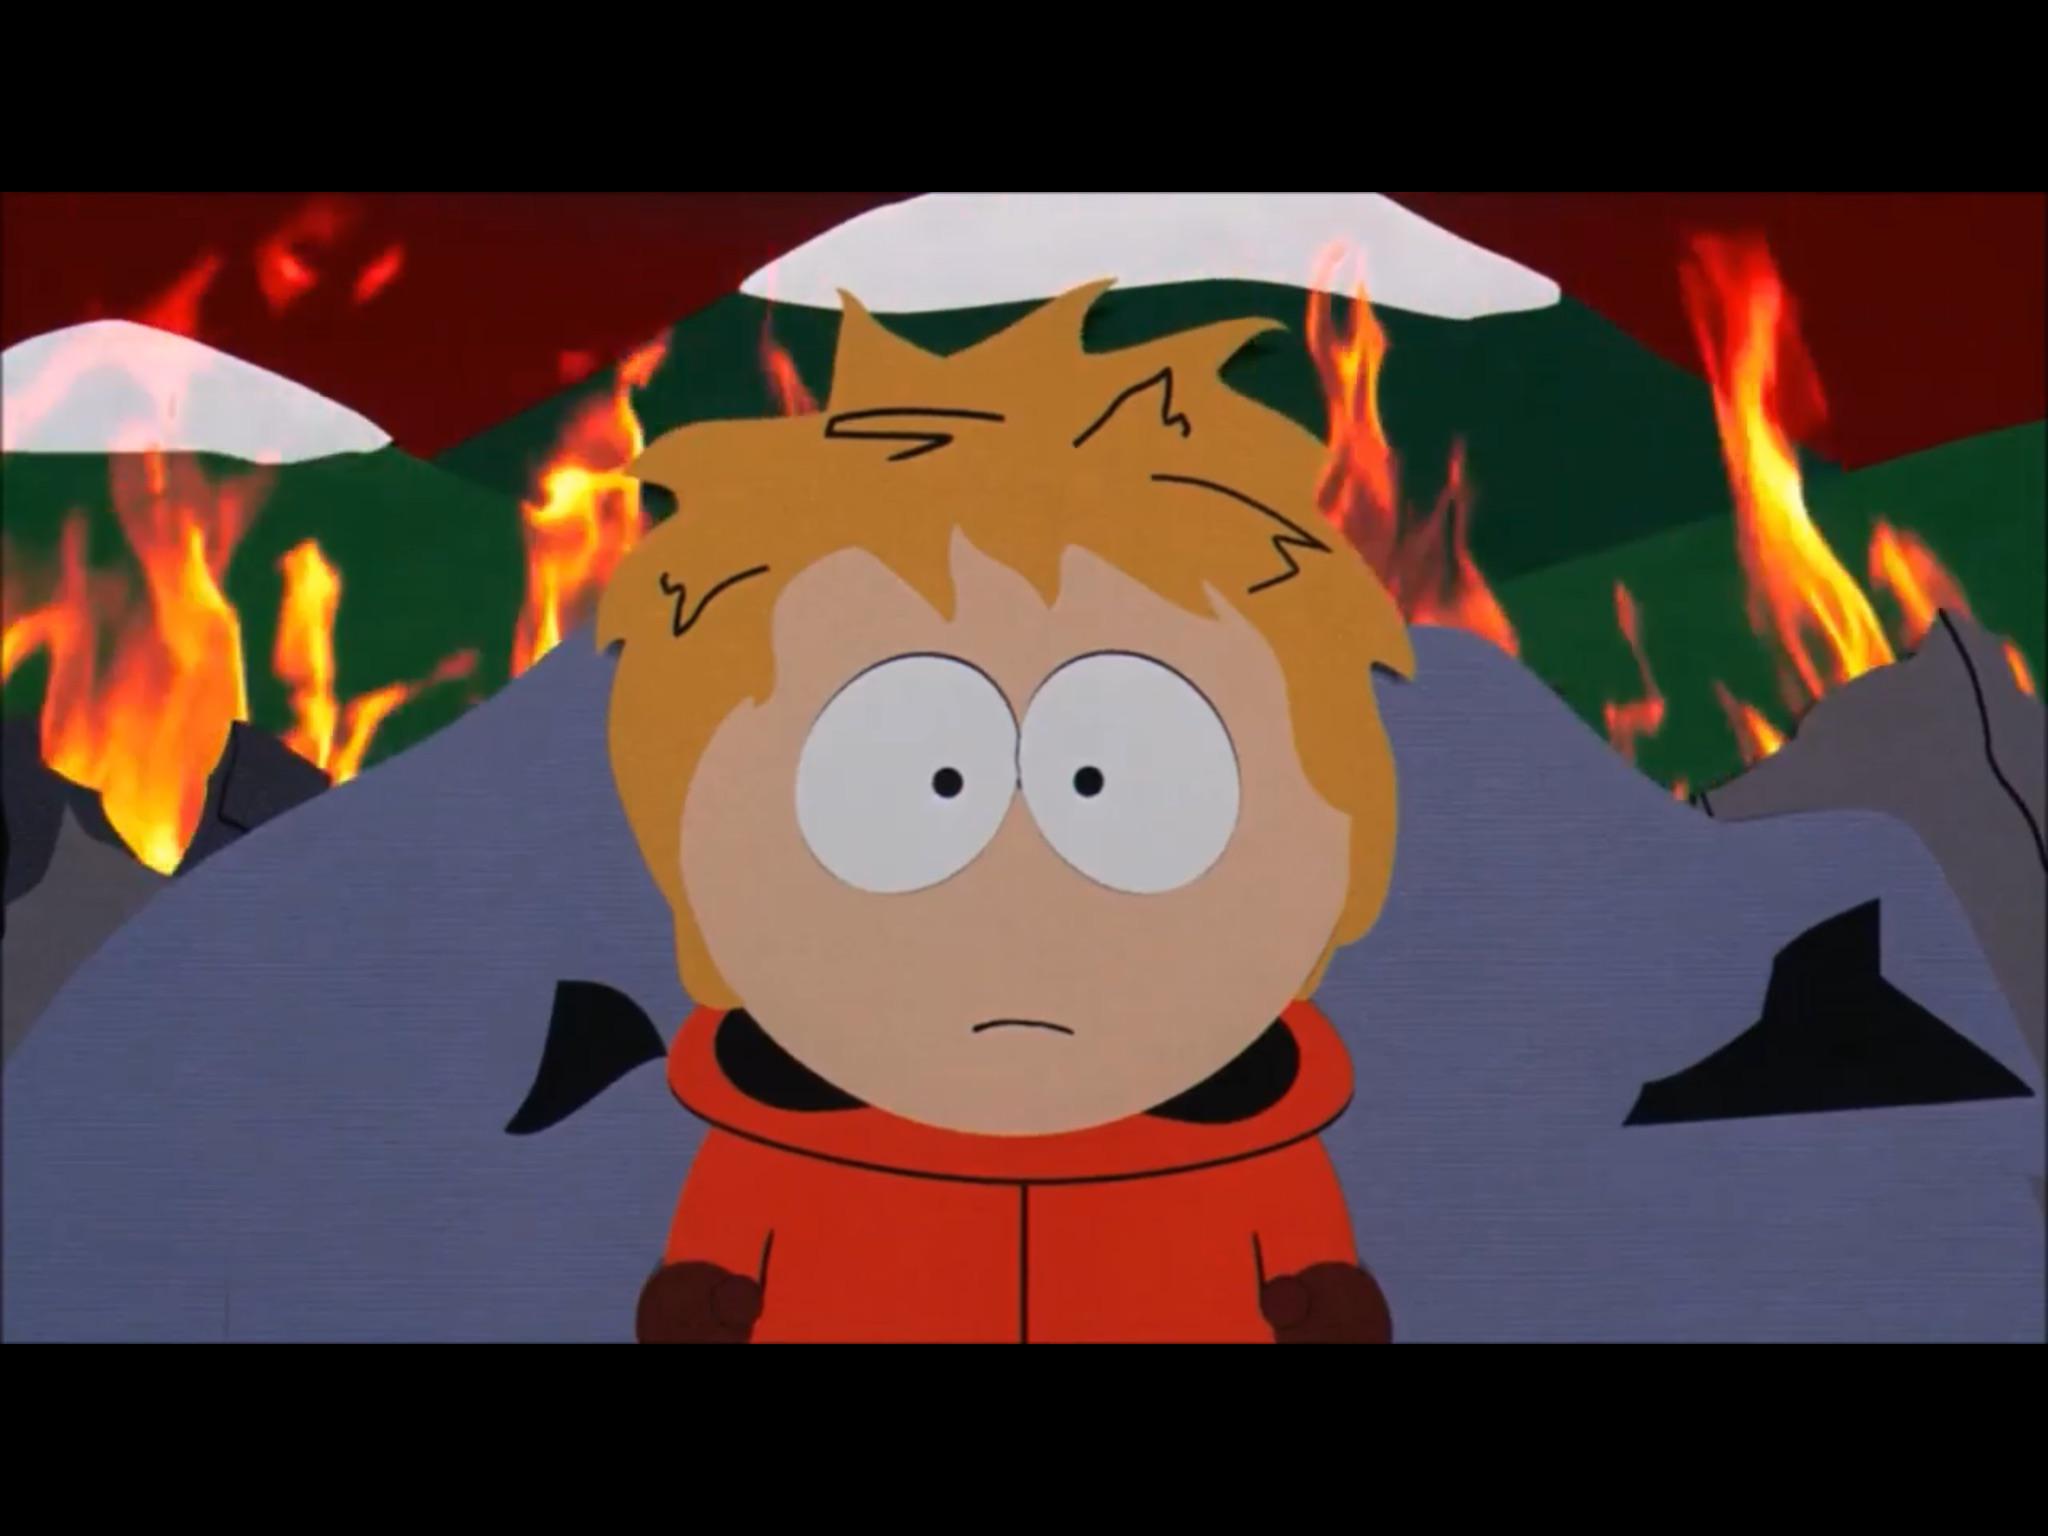 Remember when Kenny's face was shown in the South Park movie. : southpark